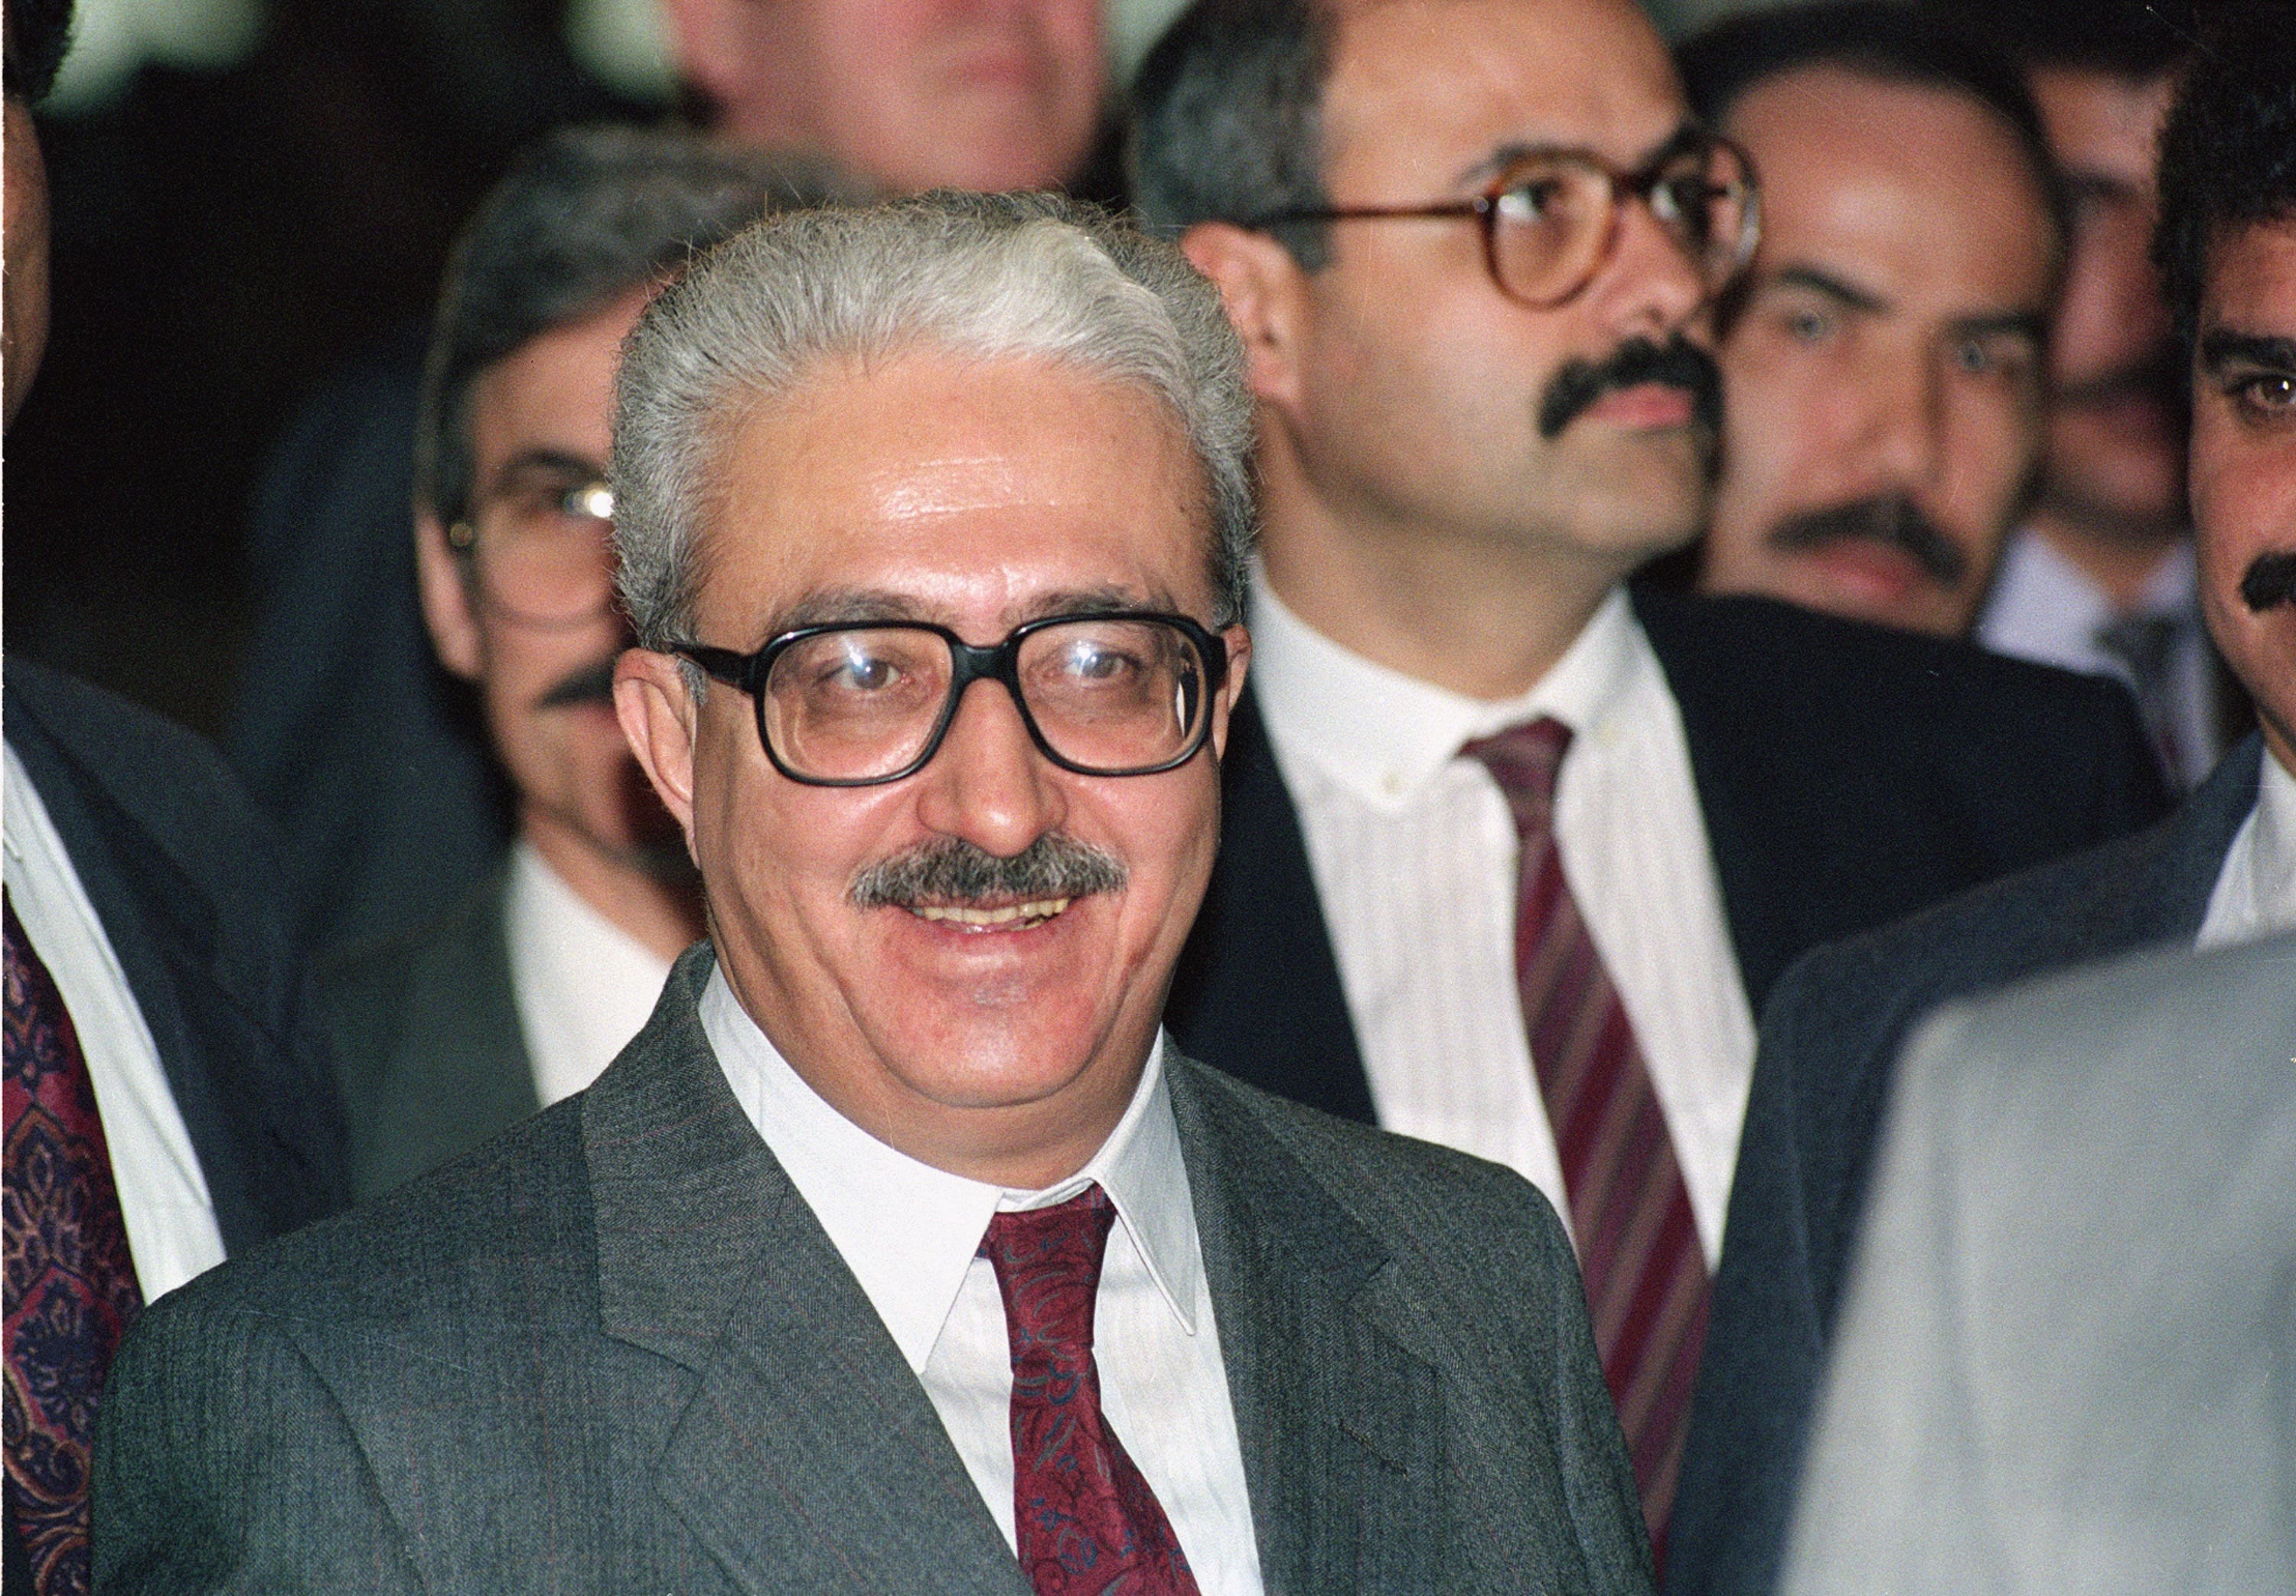 Iraqi Foreign Minister Tariq Aziz leaves the conference room after his initial meeting with U.S. Secretary of State James A. Baker in Geneva, Switzerland, Jan. 9, 1991. The meeting took place after the U.N. Security Council passed a resolution presenting the Iraqis with an ultimatum to withdraw its troops from Kuwait by Jan. 15. (File photo: AP)